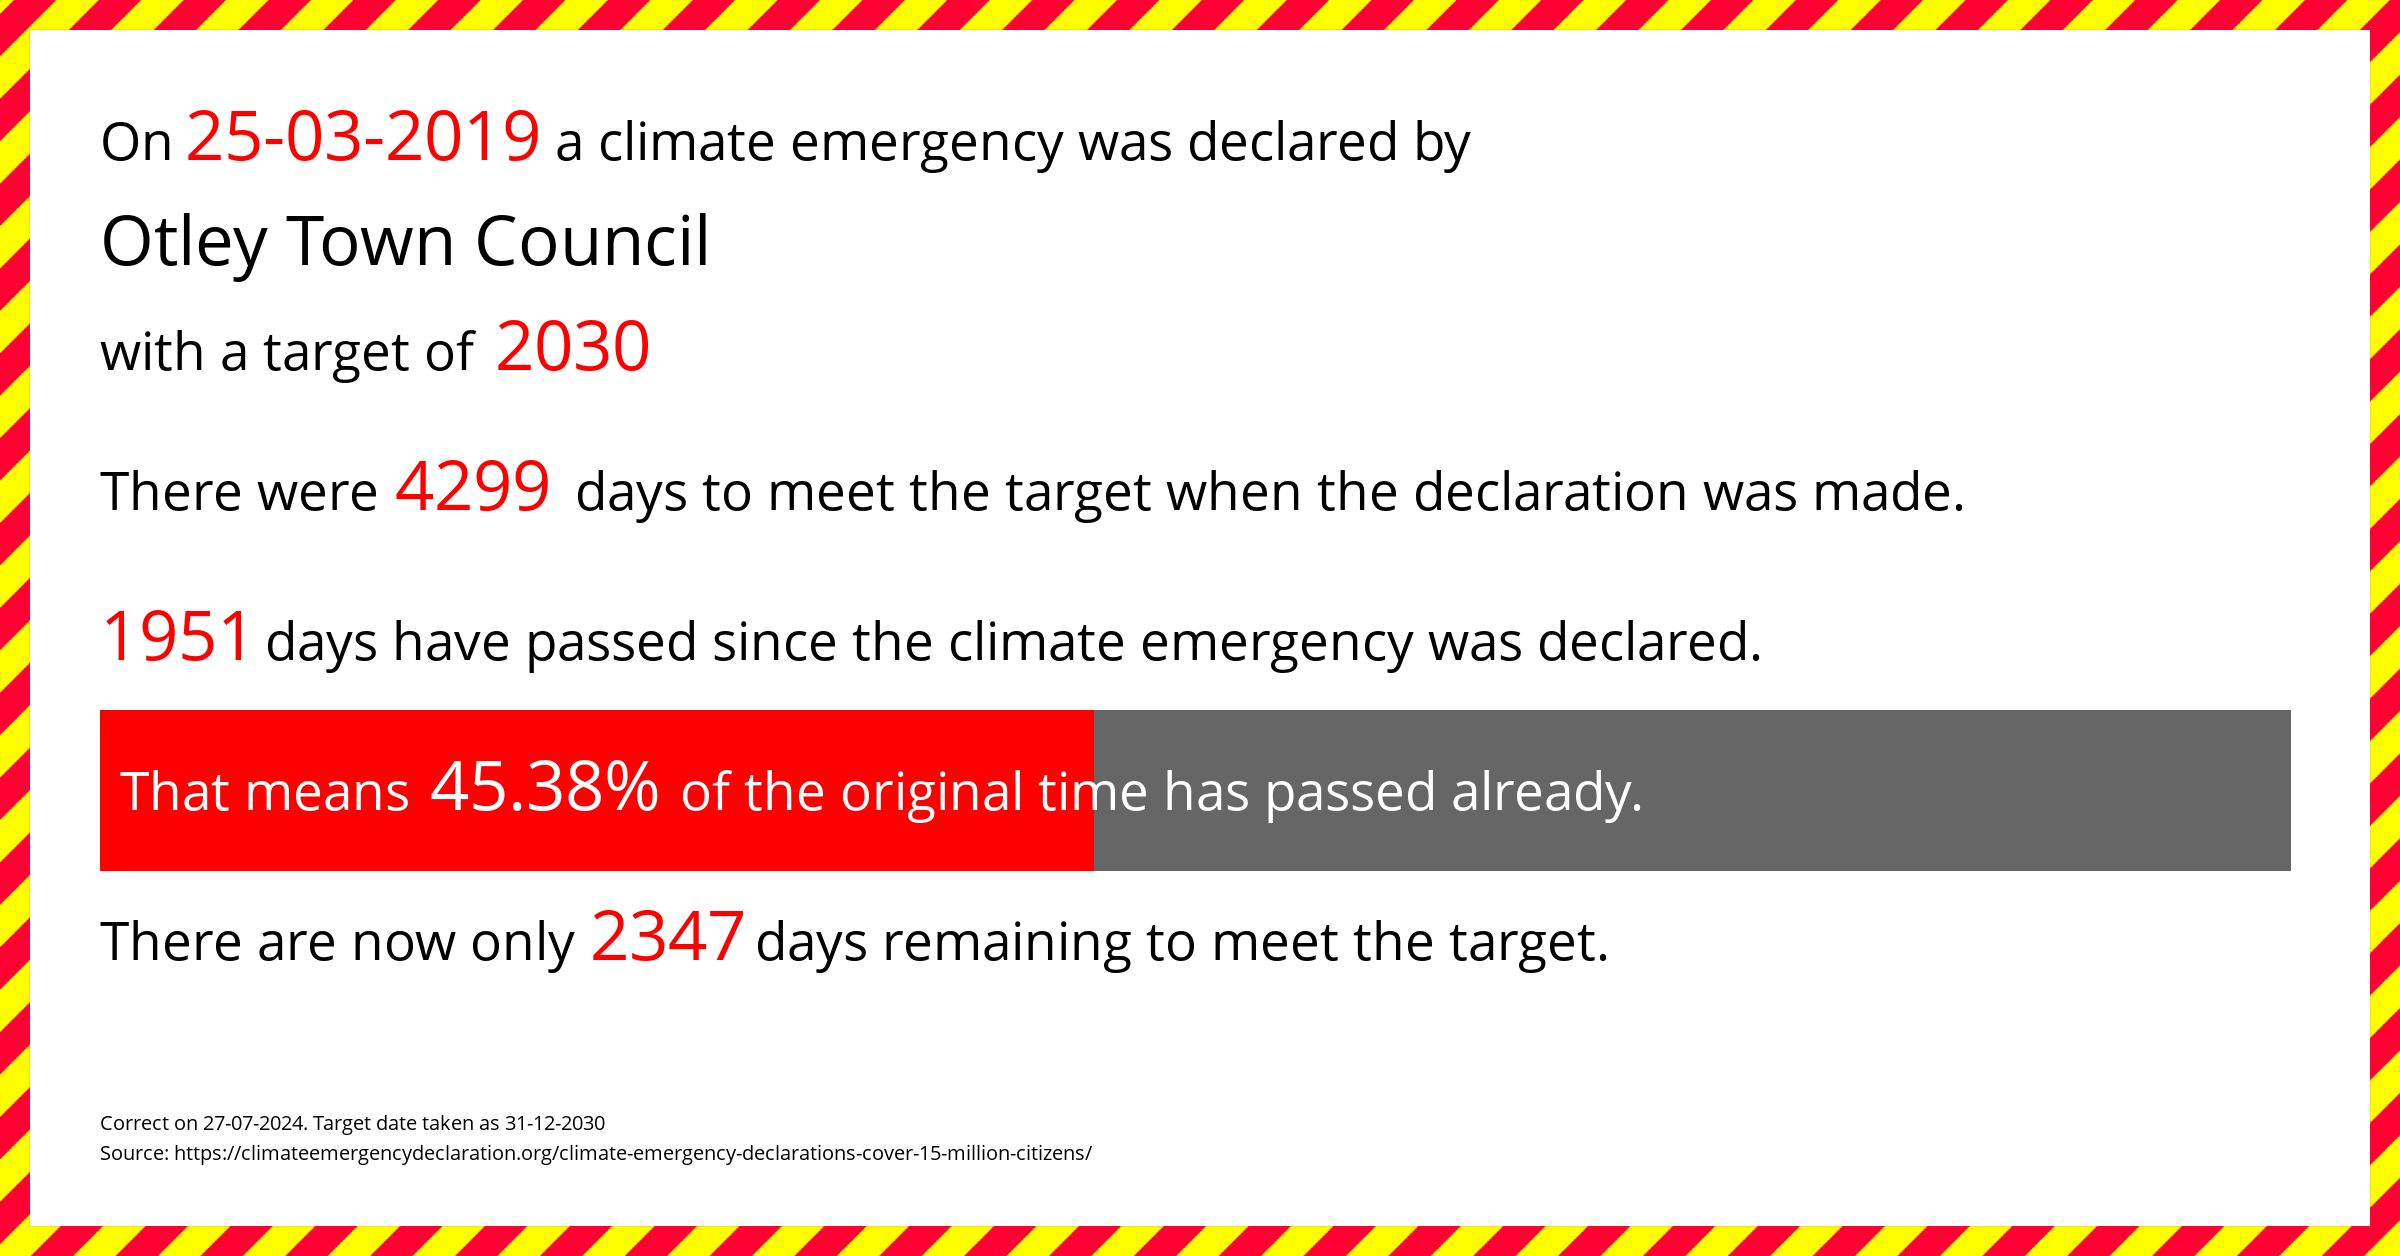 Otley Town Council declared a Climate emergency on Monday 25th March 2019, with a target of 2030.